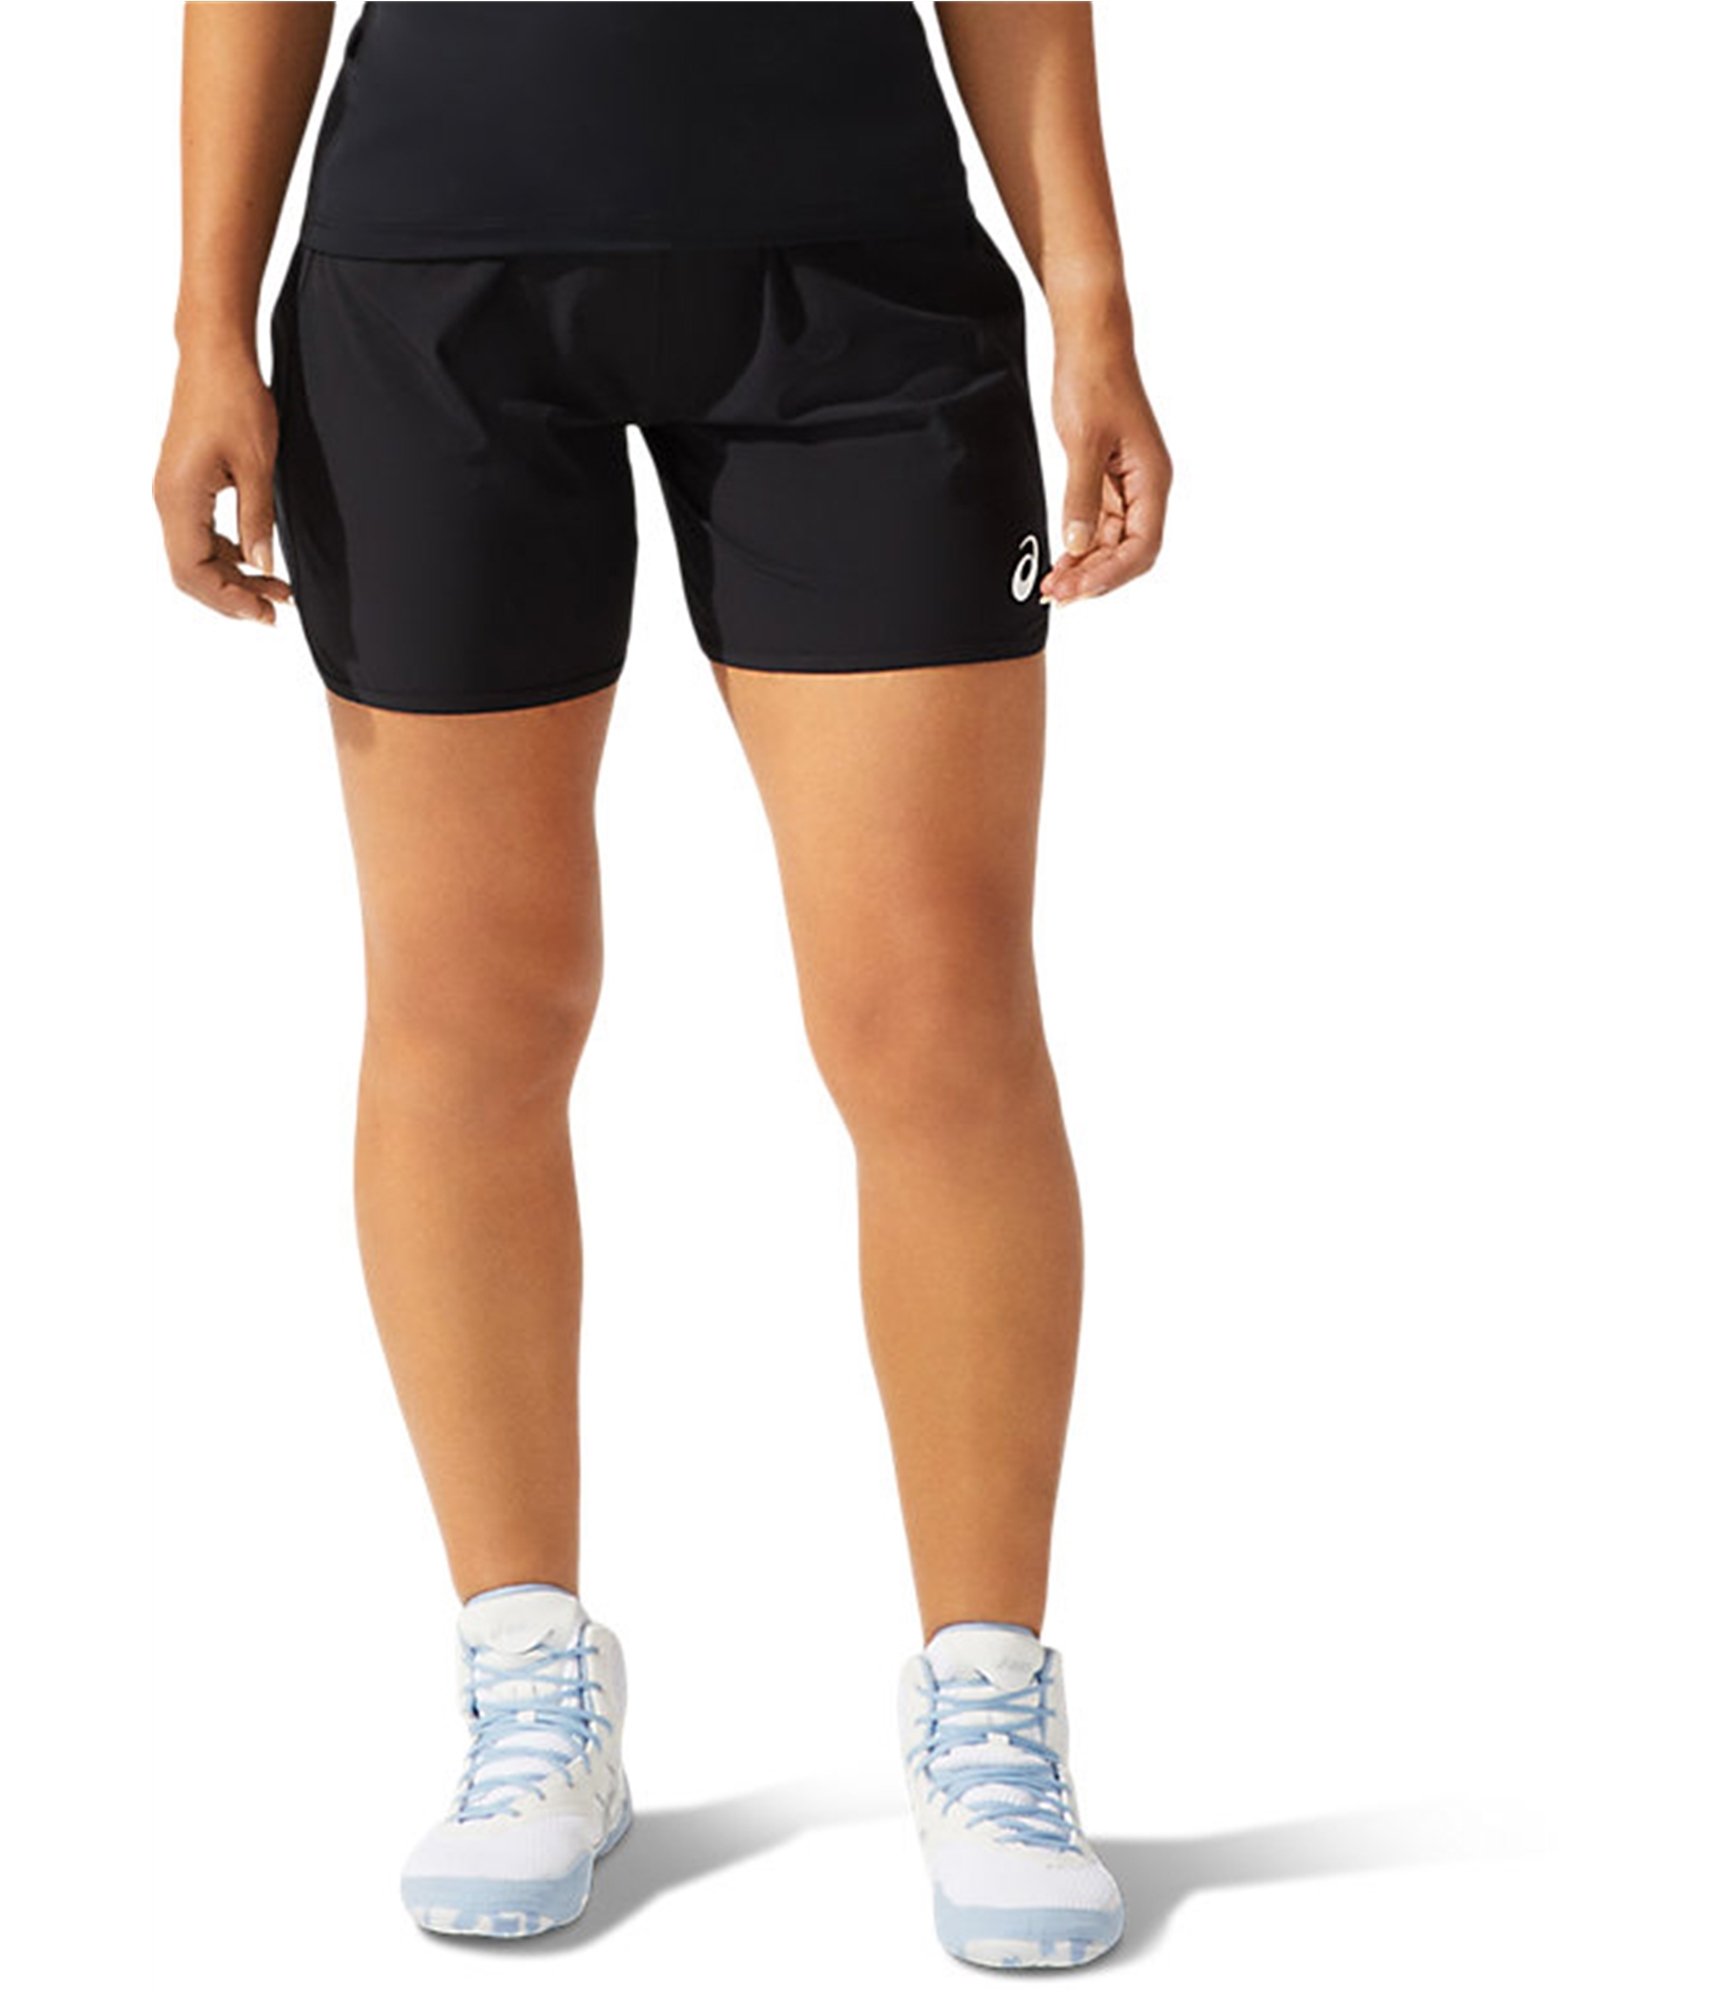 Workout Buy Piece a Wrestling Asics Athletic 2 | Tagsweekly Shorts Womens